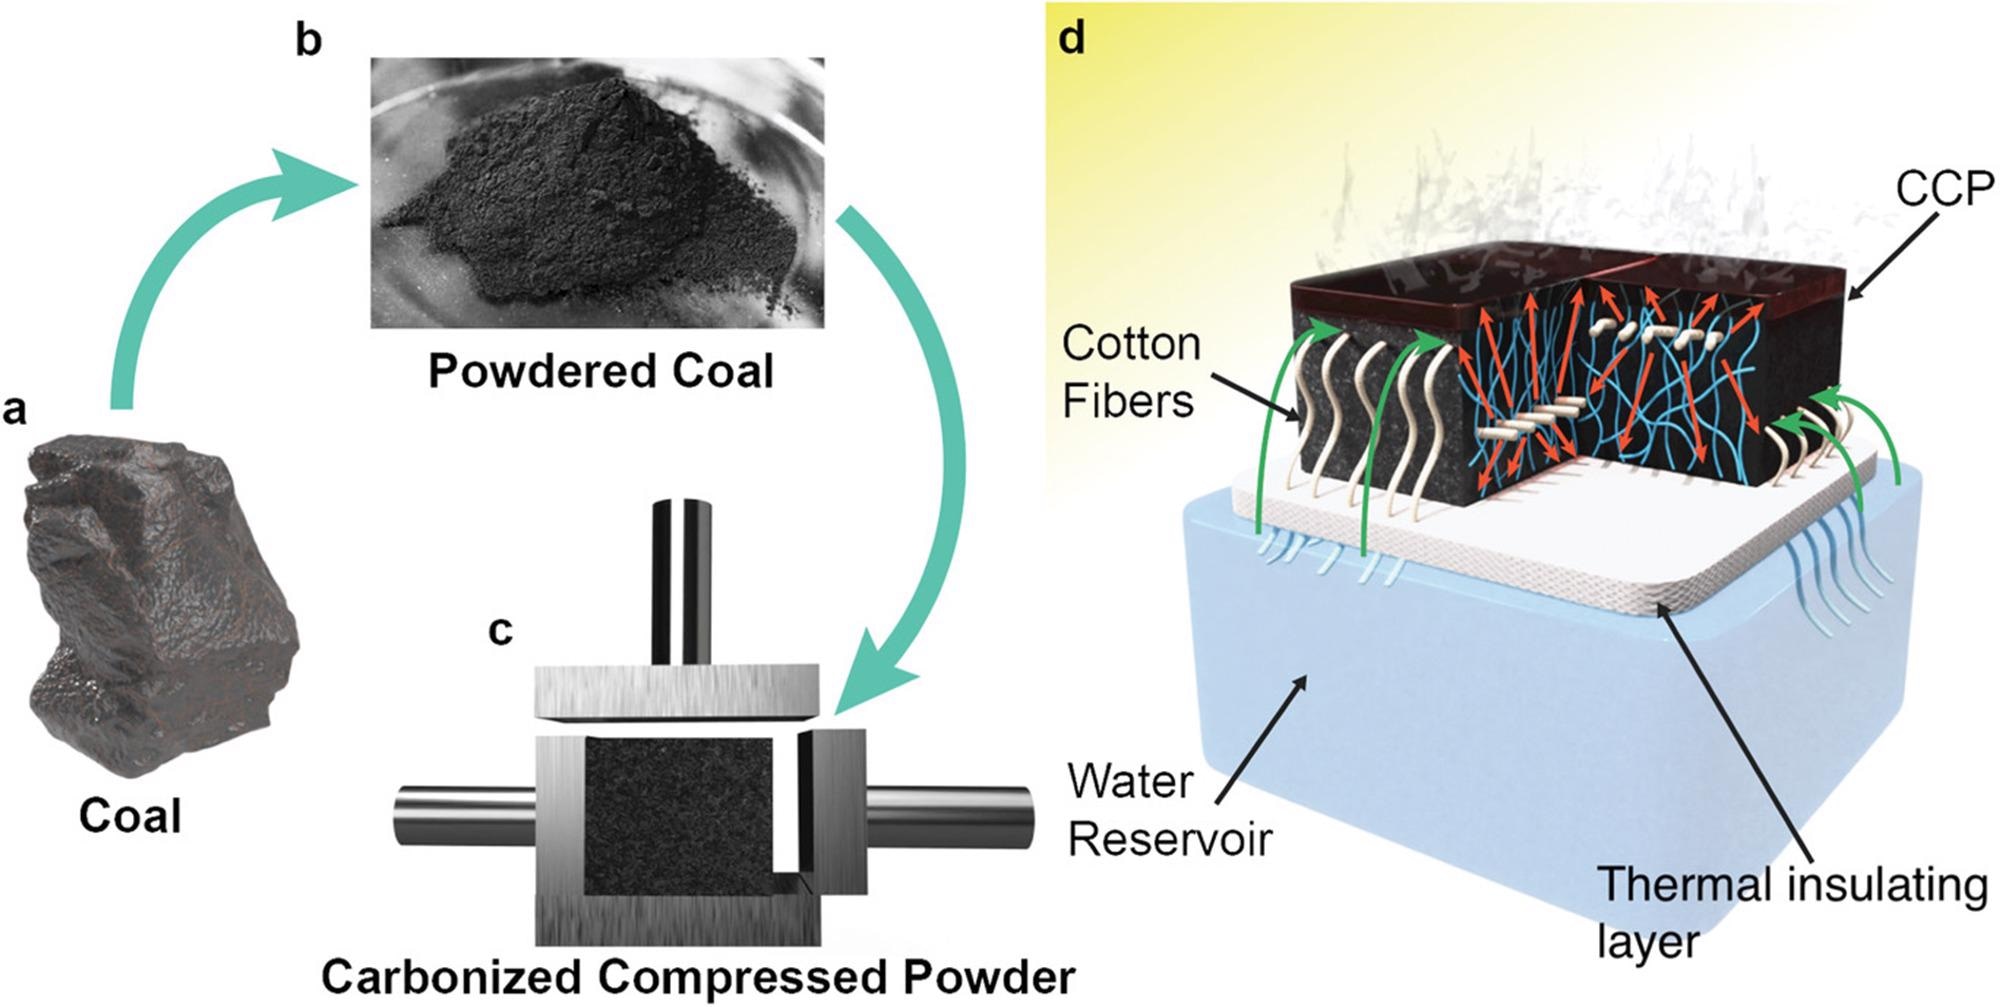 How do carbonized compressed powder blocks clean water?